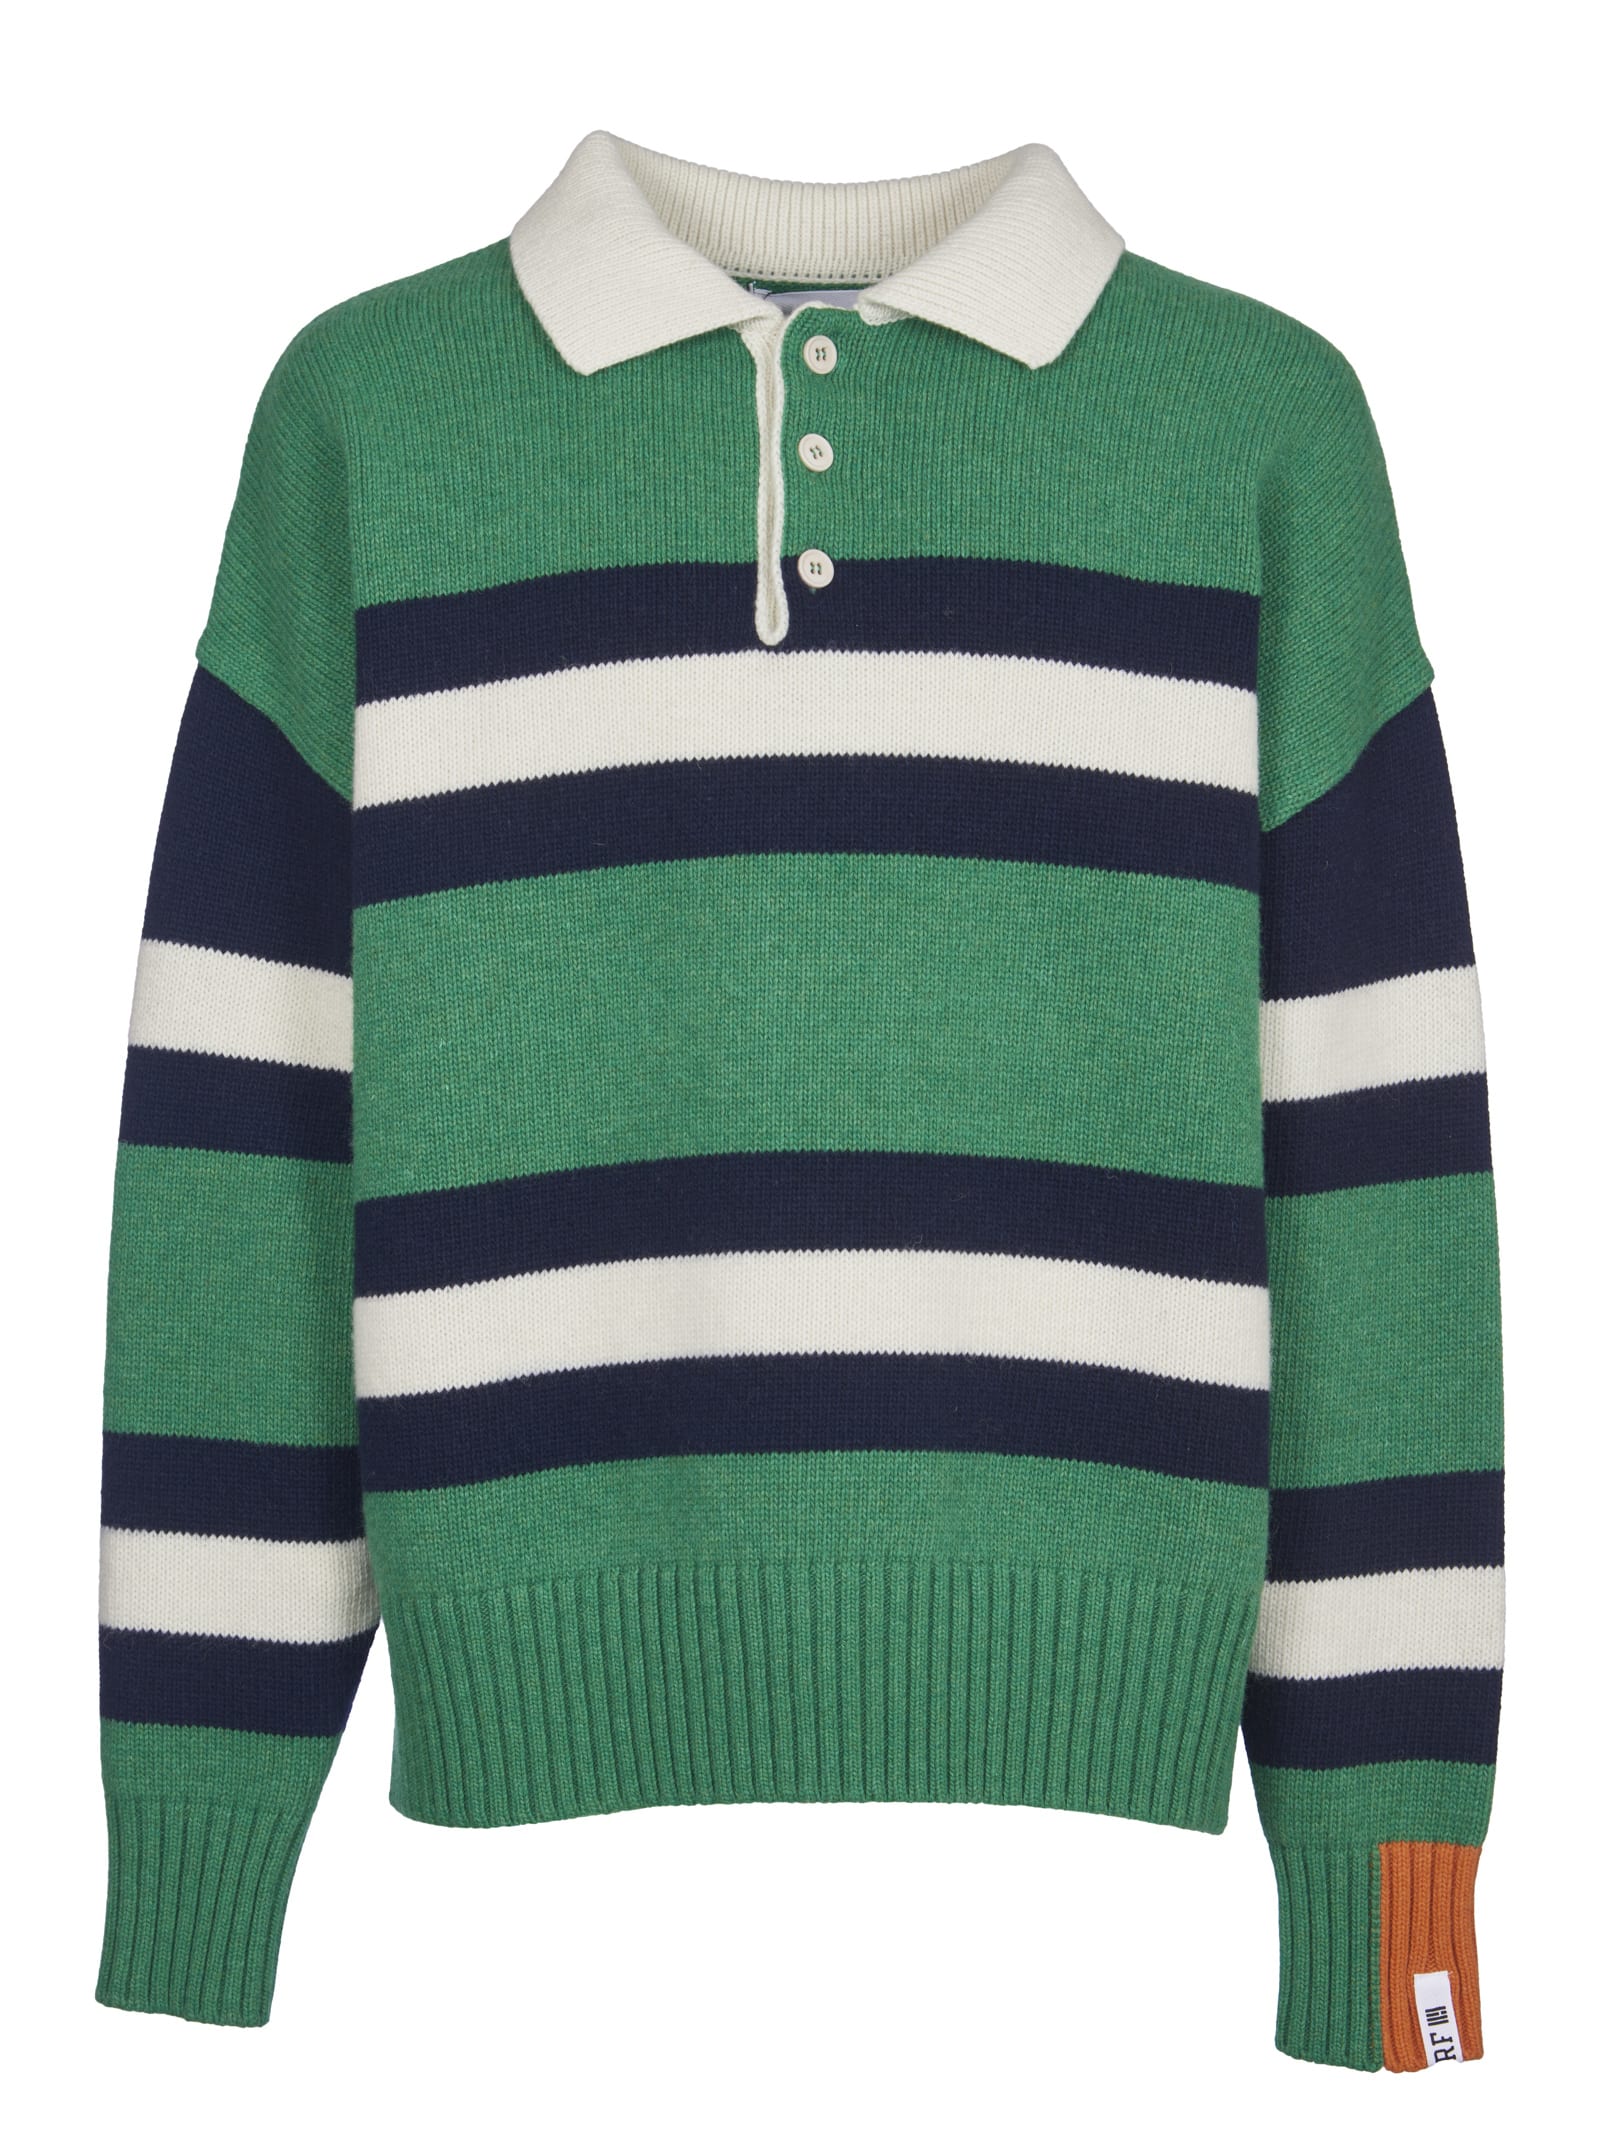 Right For Green Polo Striped Sweater